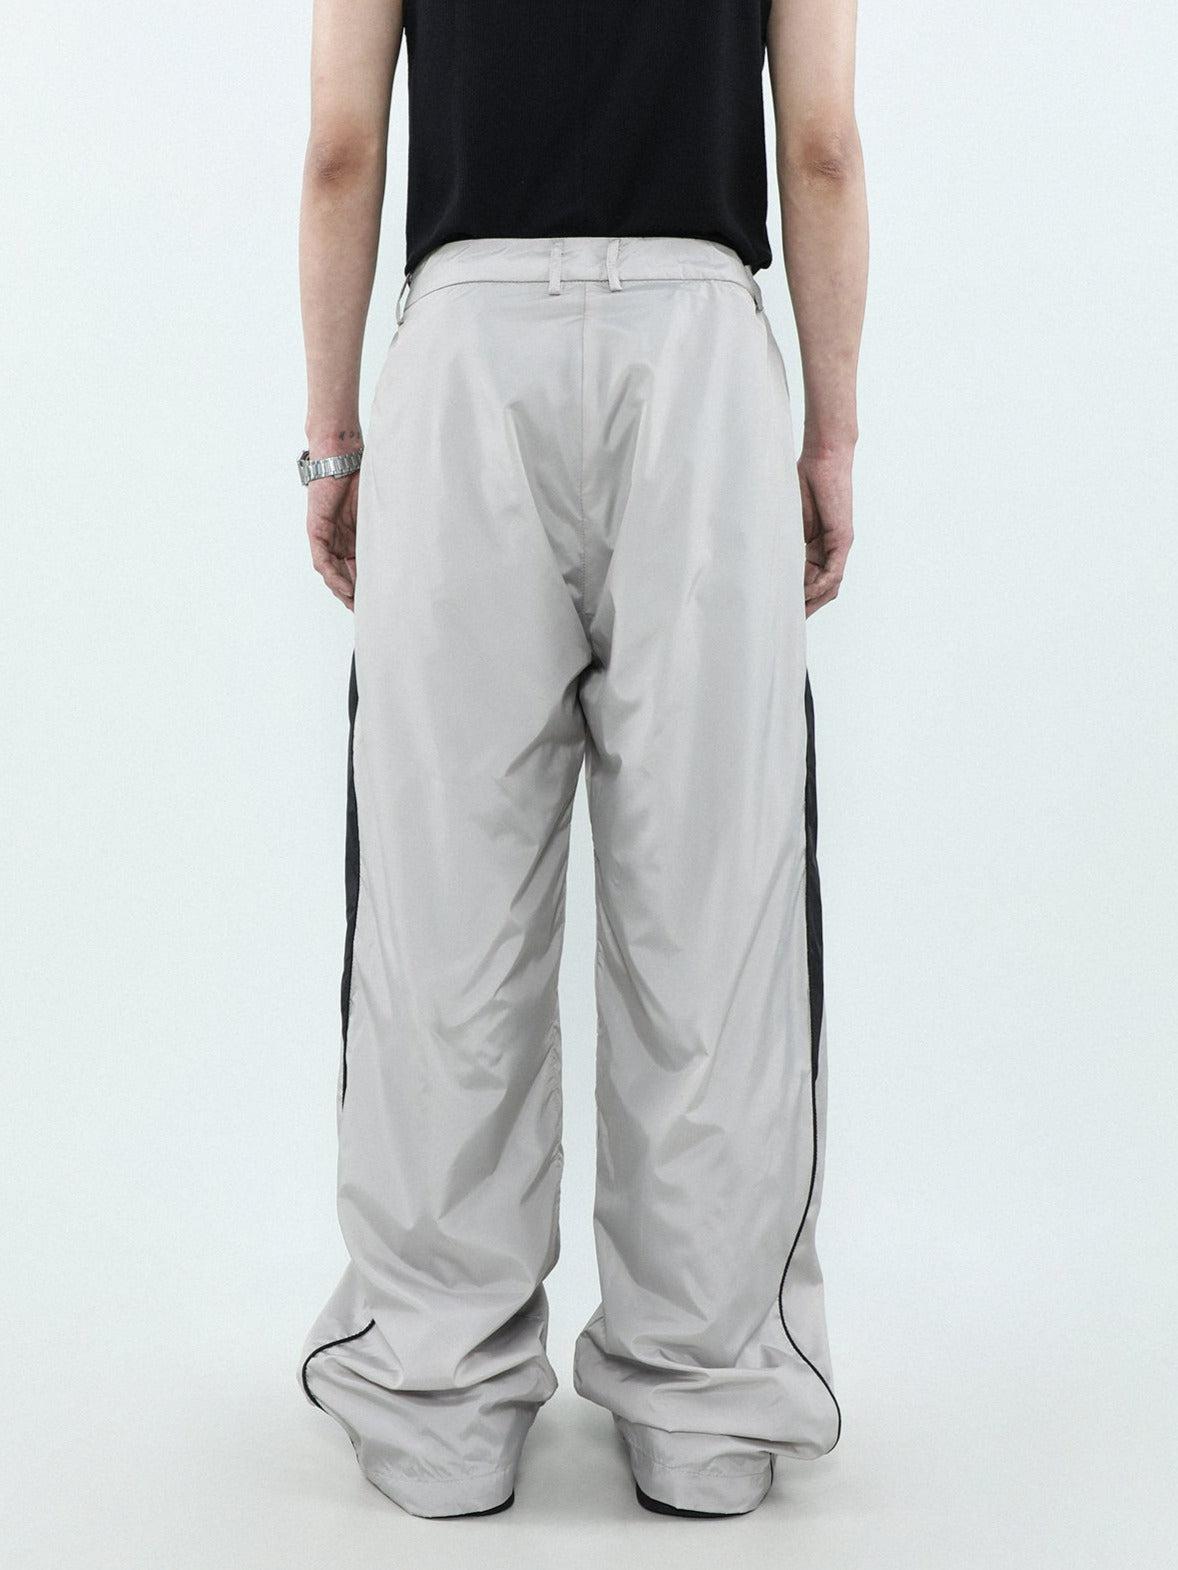 Contrast Side Seam Sports Pants Korean Street Fashion Pants By Mr Nearly Shop Online at OH Vault